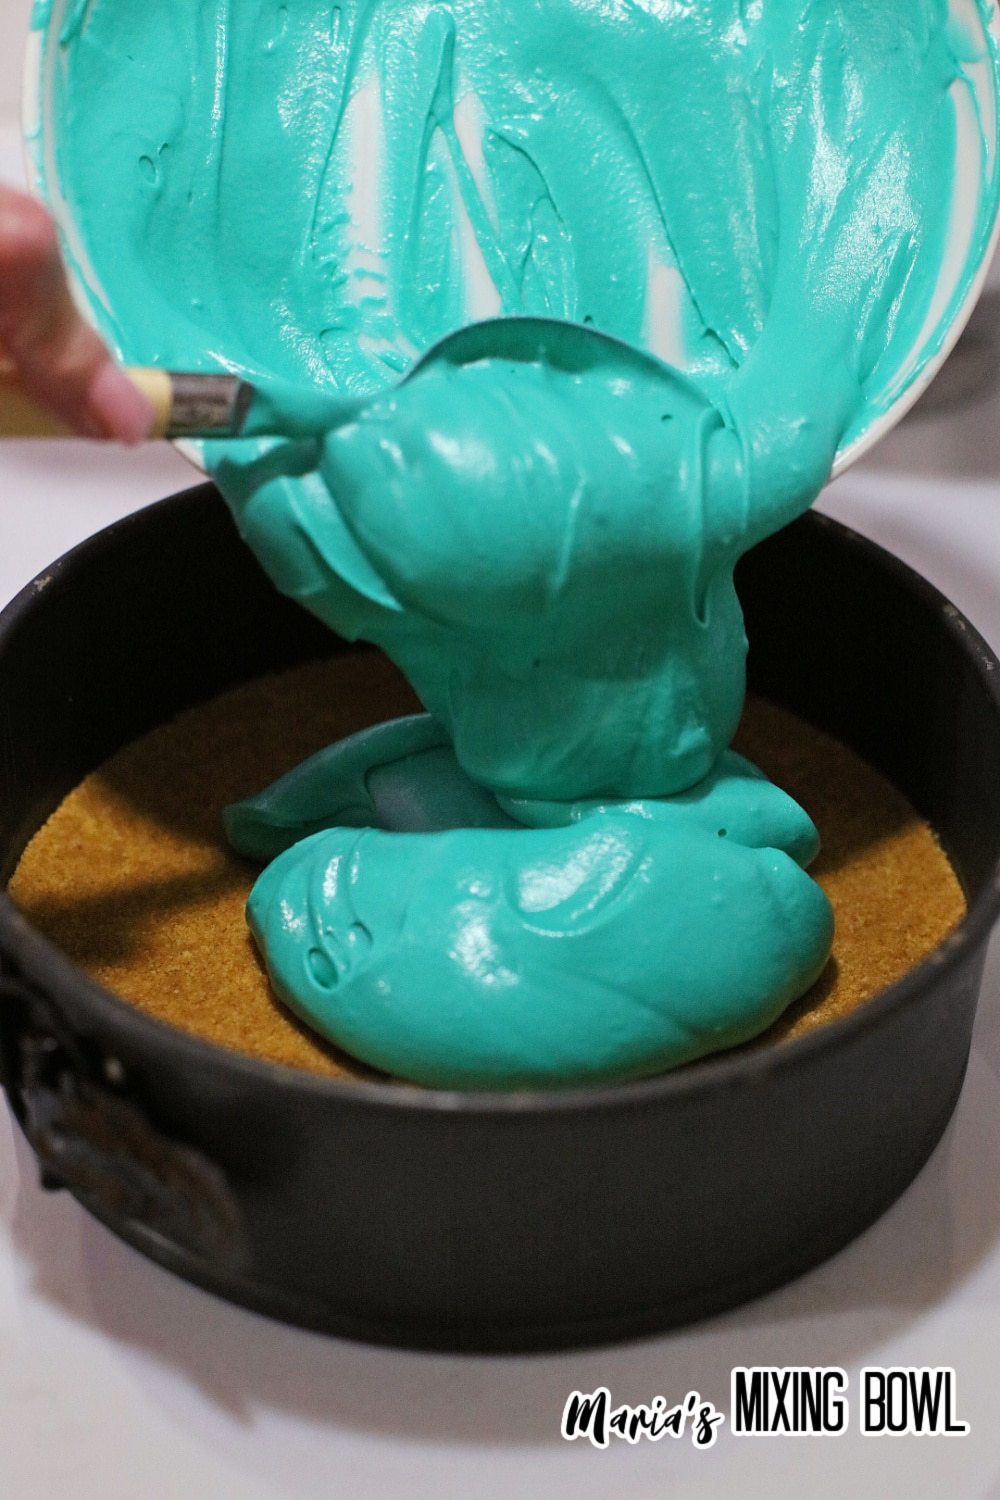 blue batter being poured over a crust in a springform pan